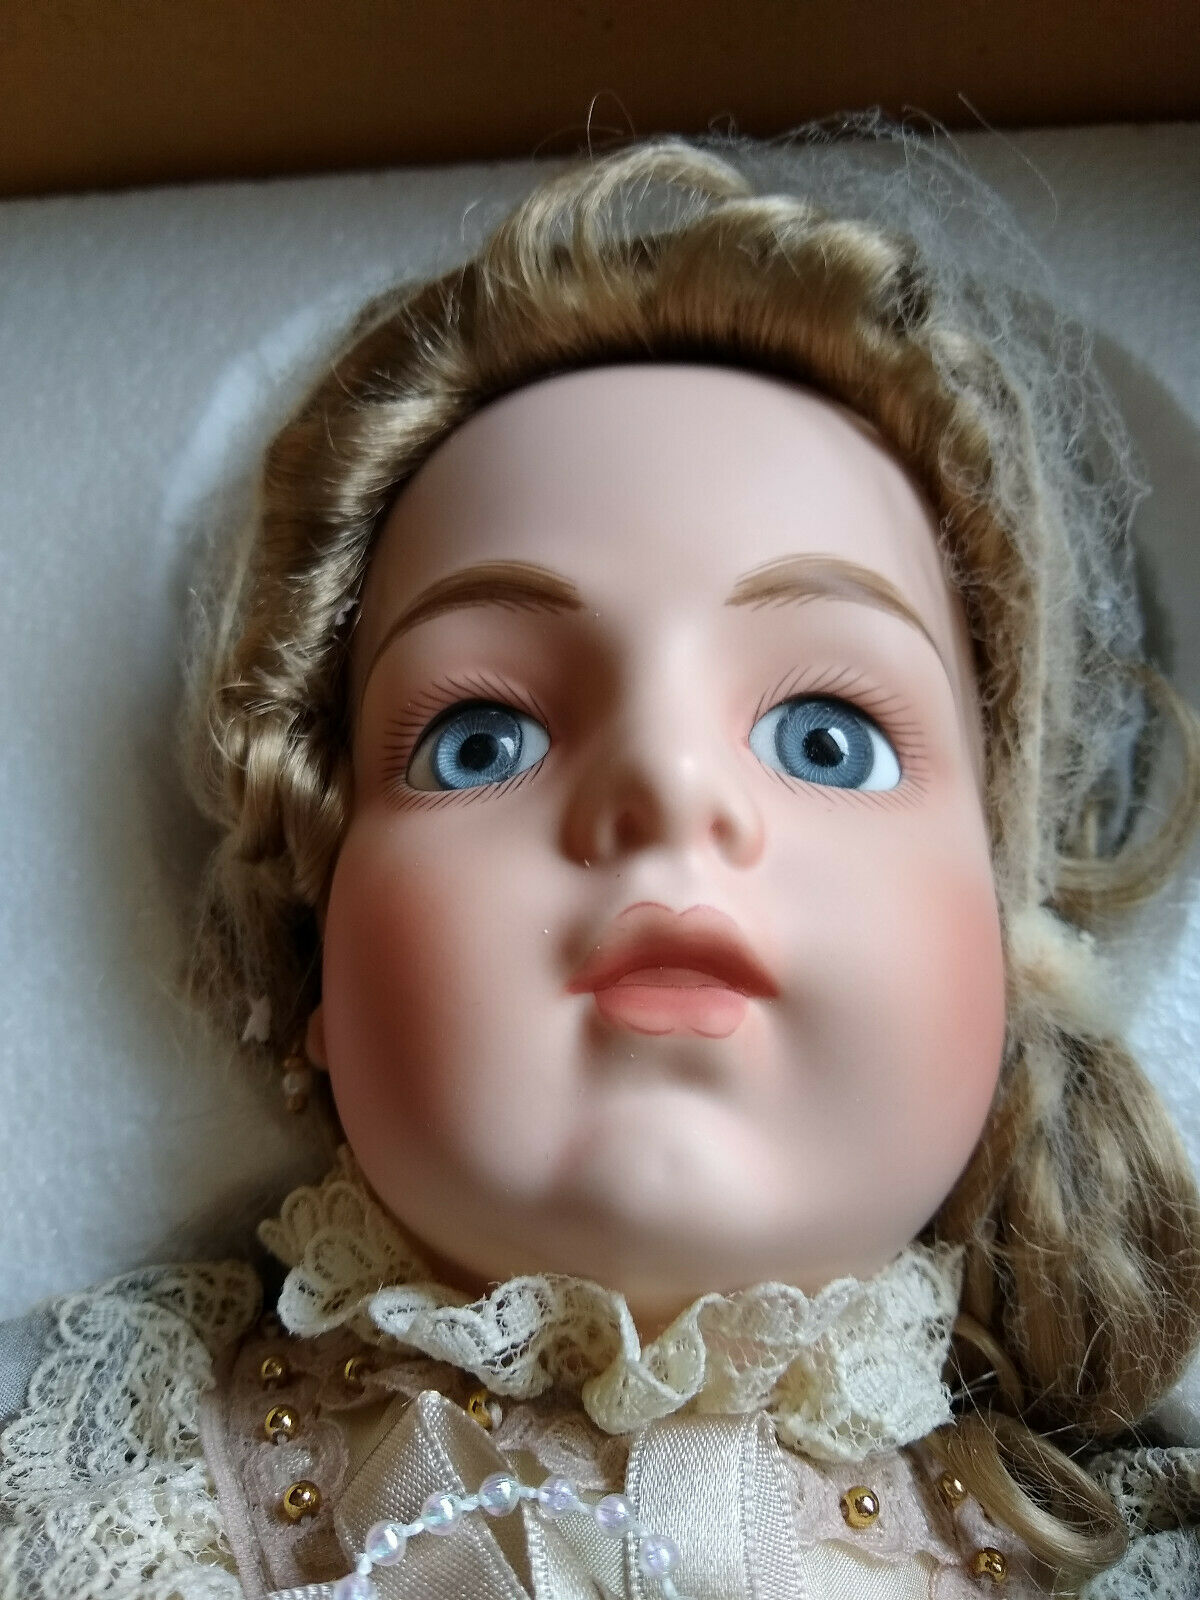 Lovely Jointed Adelle Bru Jne Reproduction Antique Doll